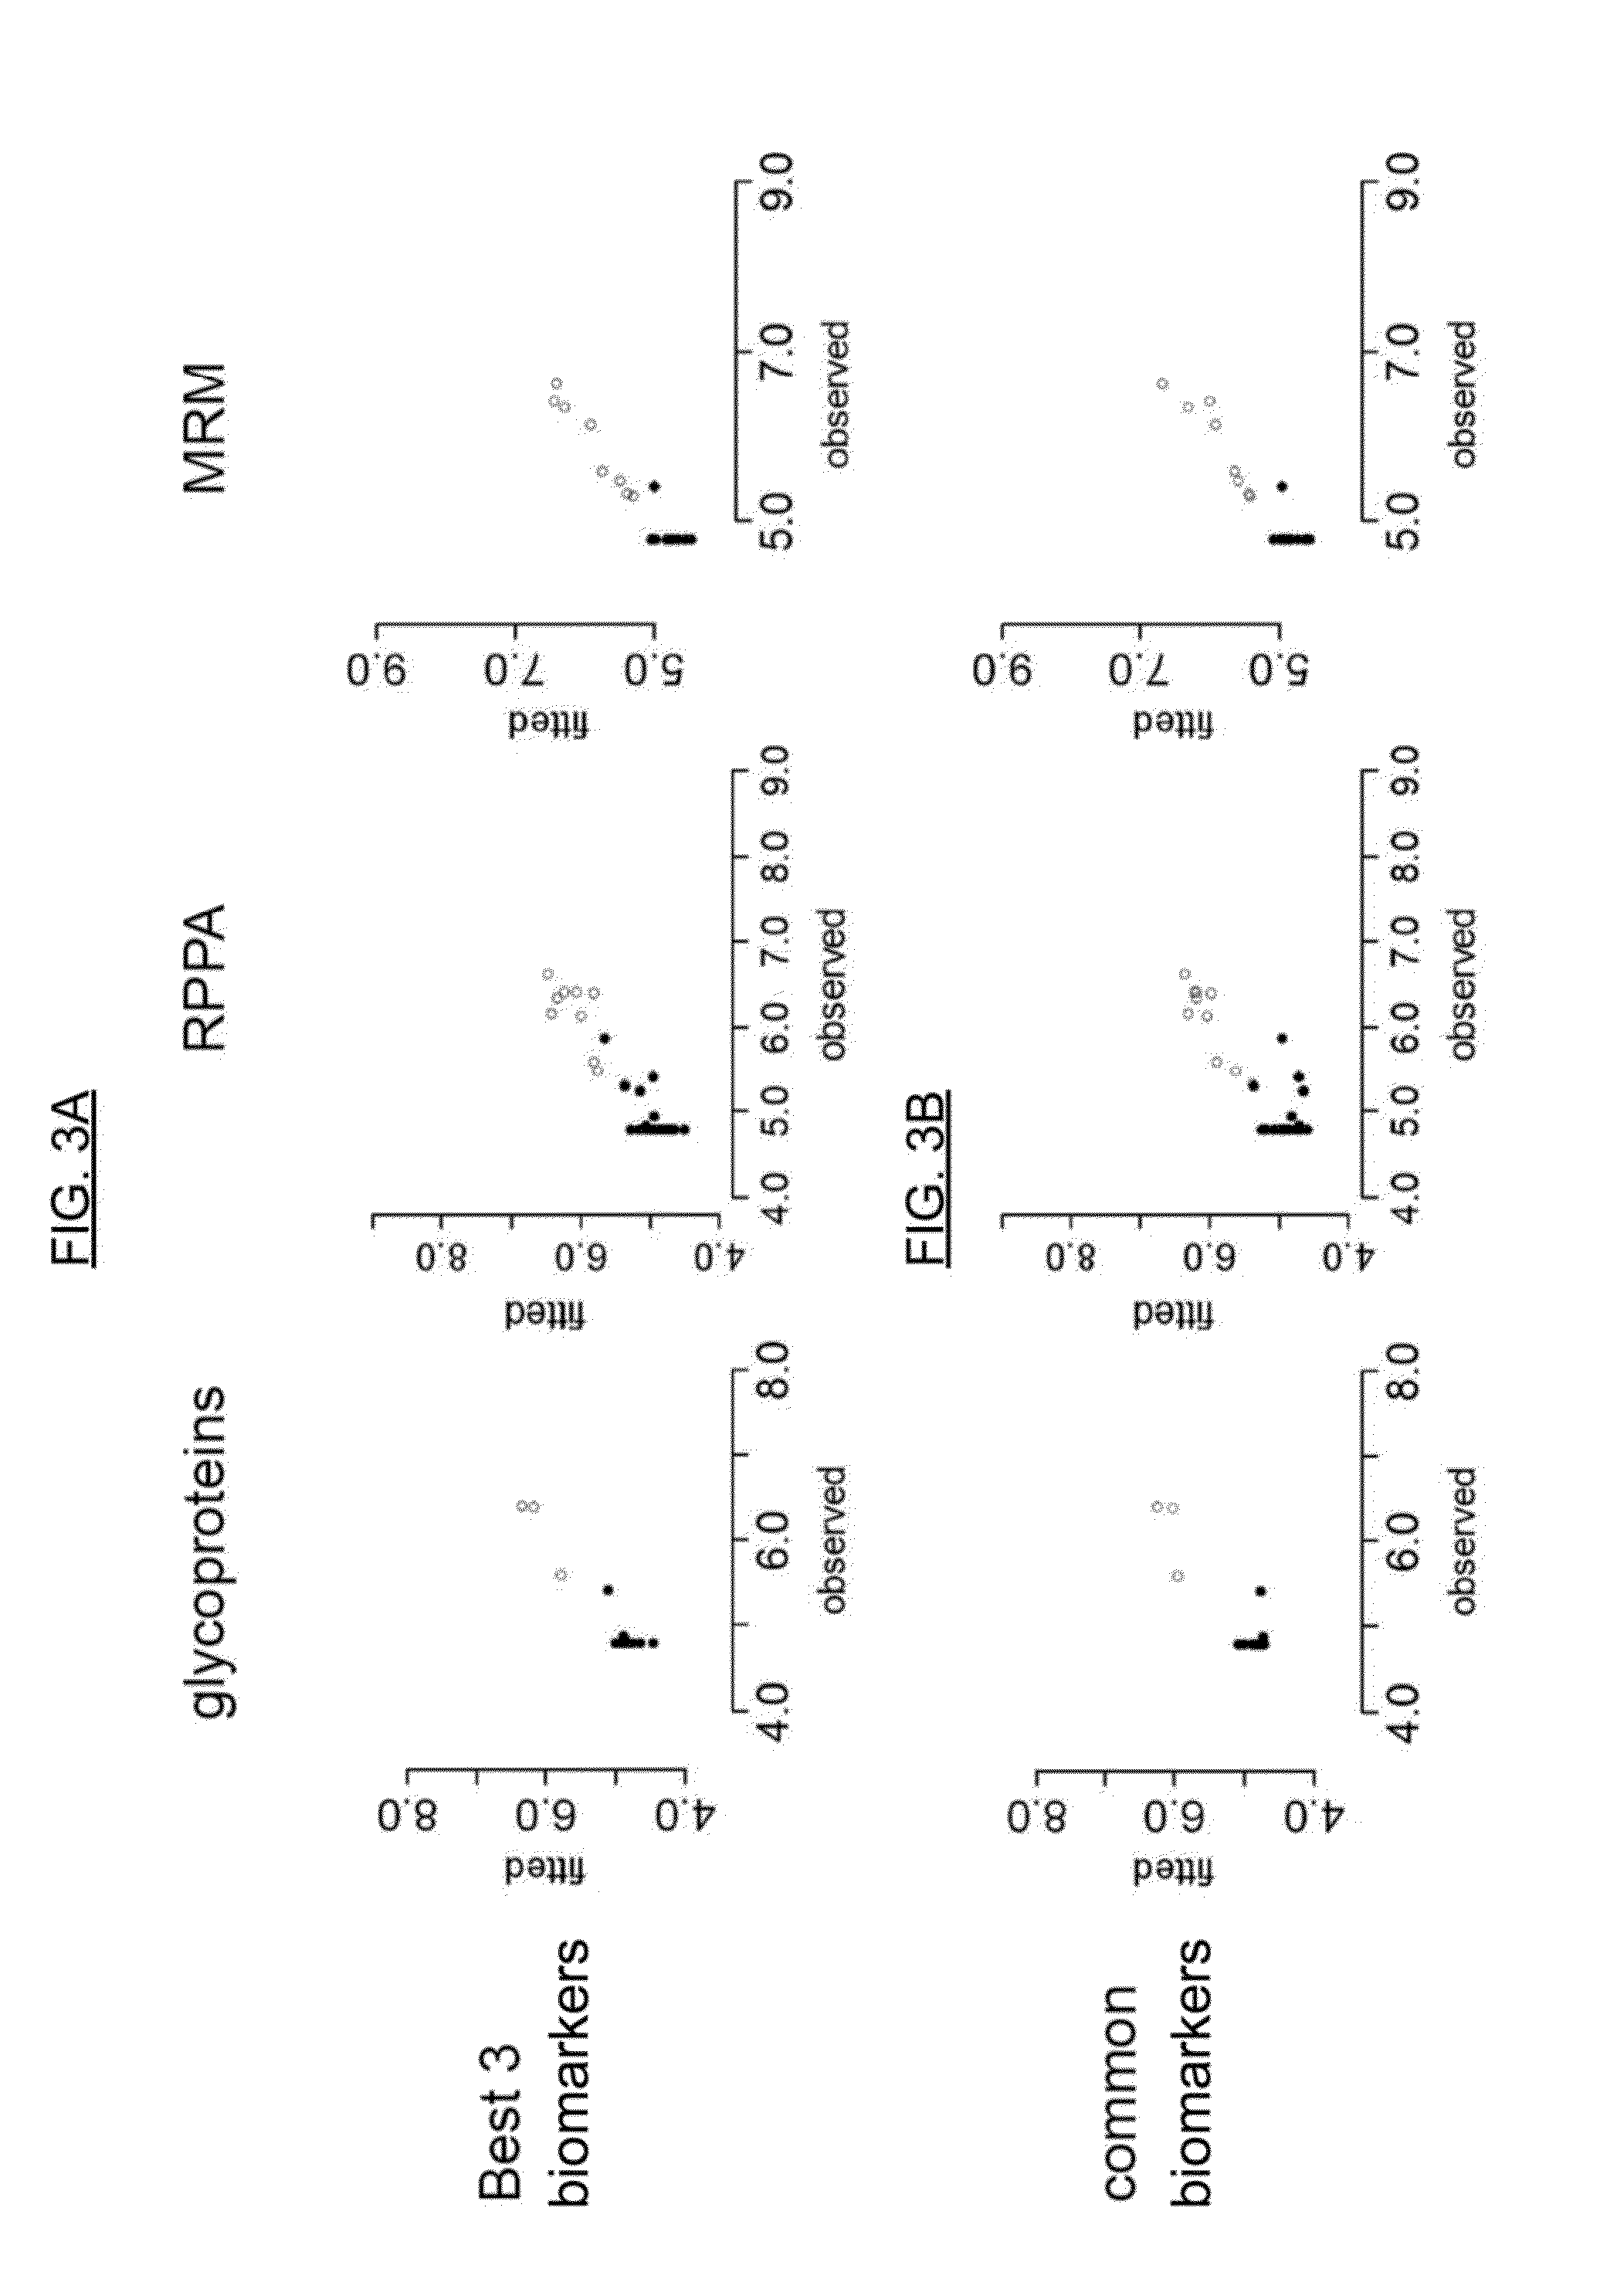 Methods and Models for Determining Likelihood of Cancer Drug Treatment Success Utilizing Predictor Biomarkers, and Methods of Diagnosing and Treating Cancer Using the Biomarkers